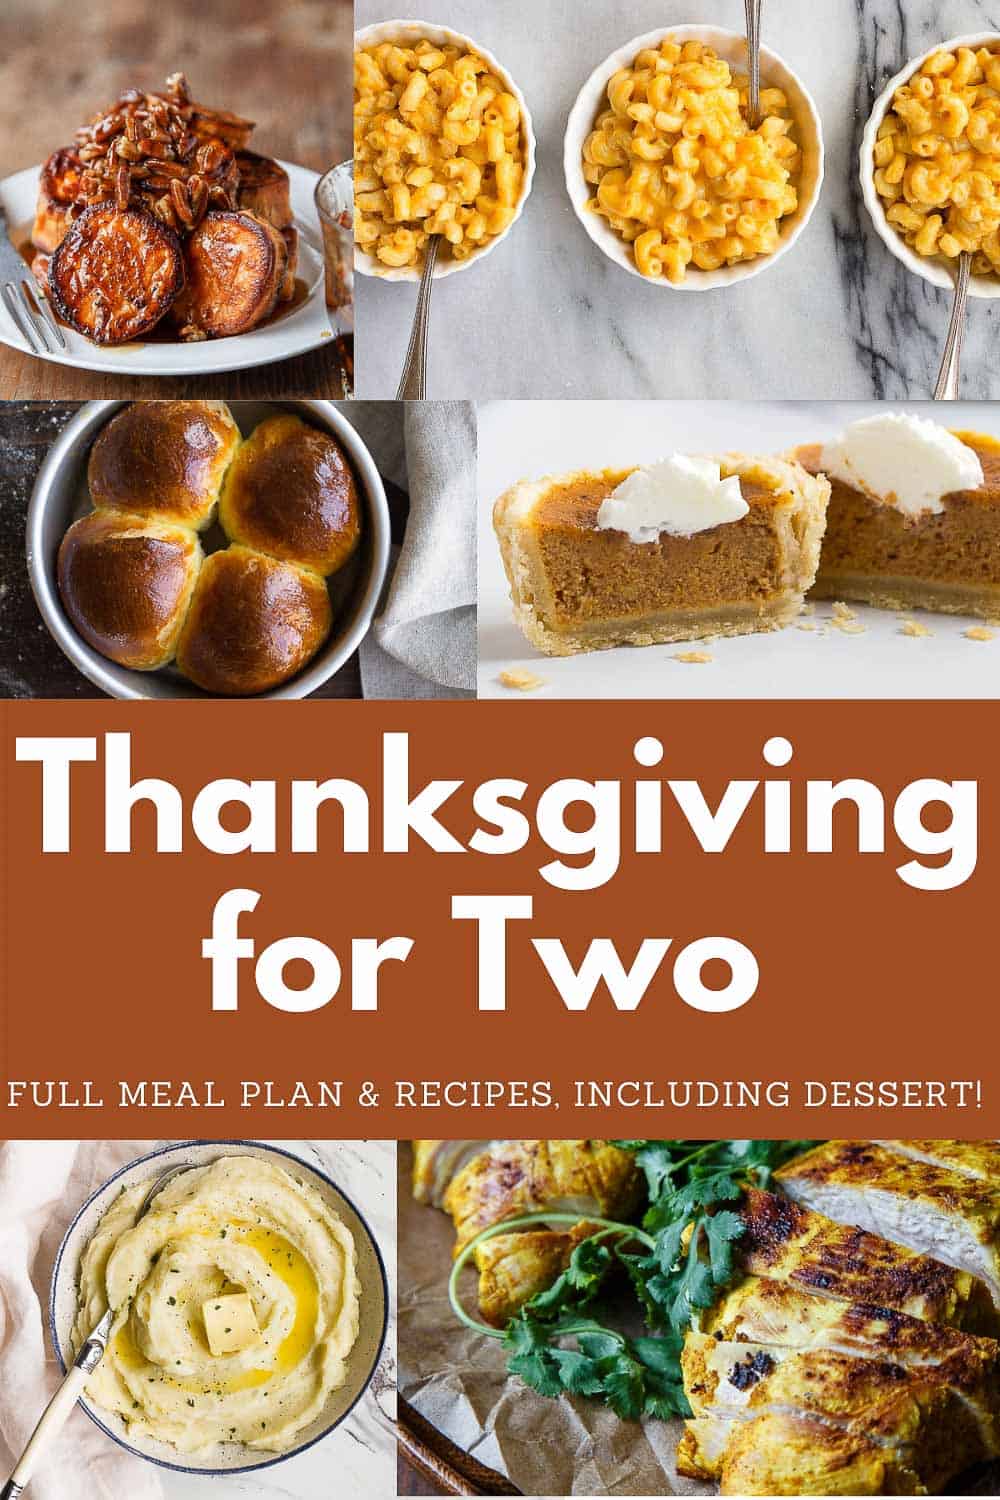 Thanksgiving Sheet Pan Meal for Two